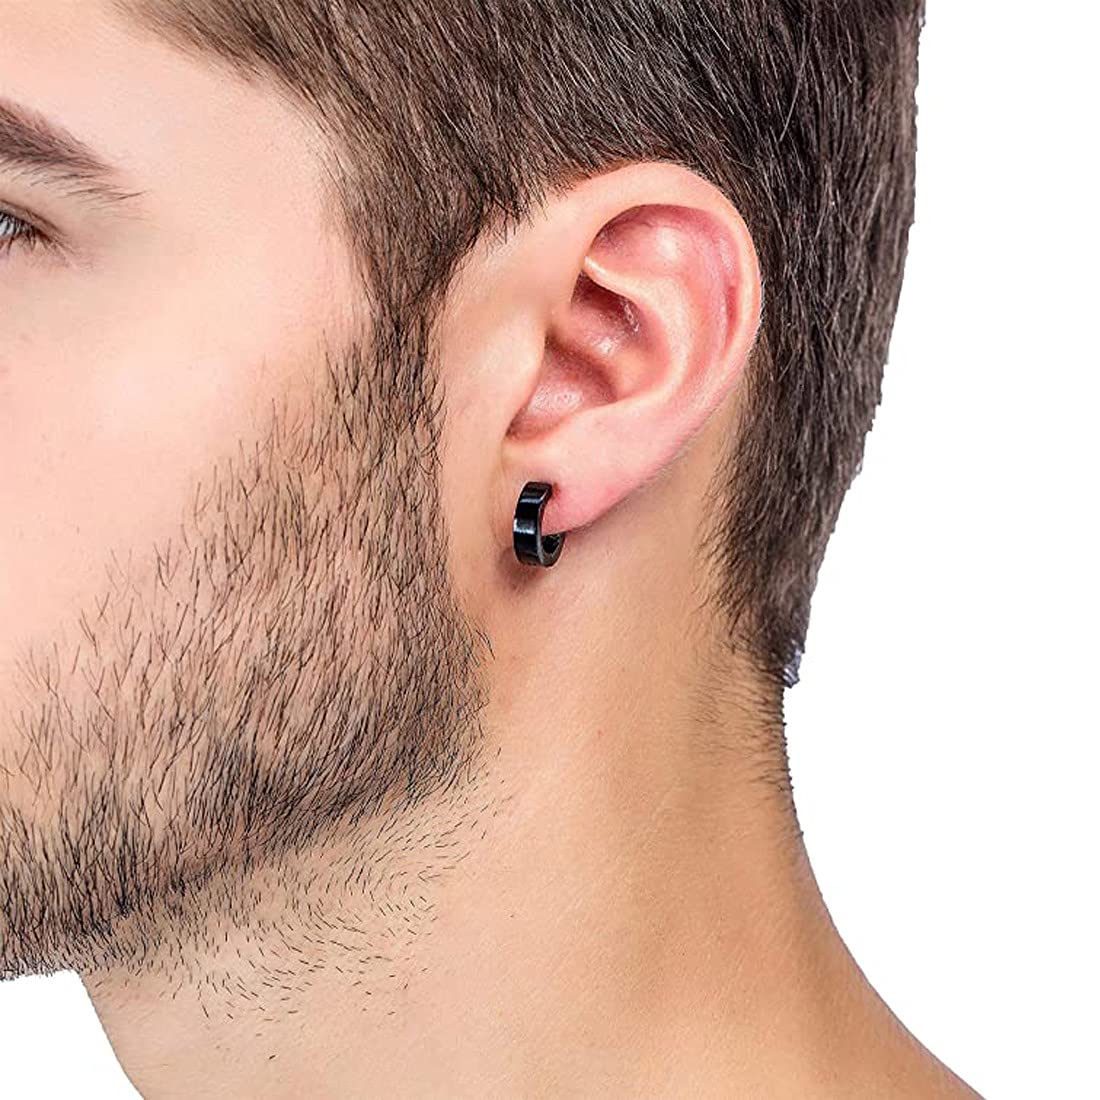 What Does A Man Wearing Earrings Mean? – GTHIC